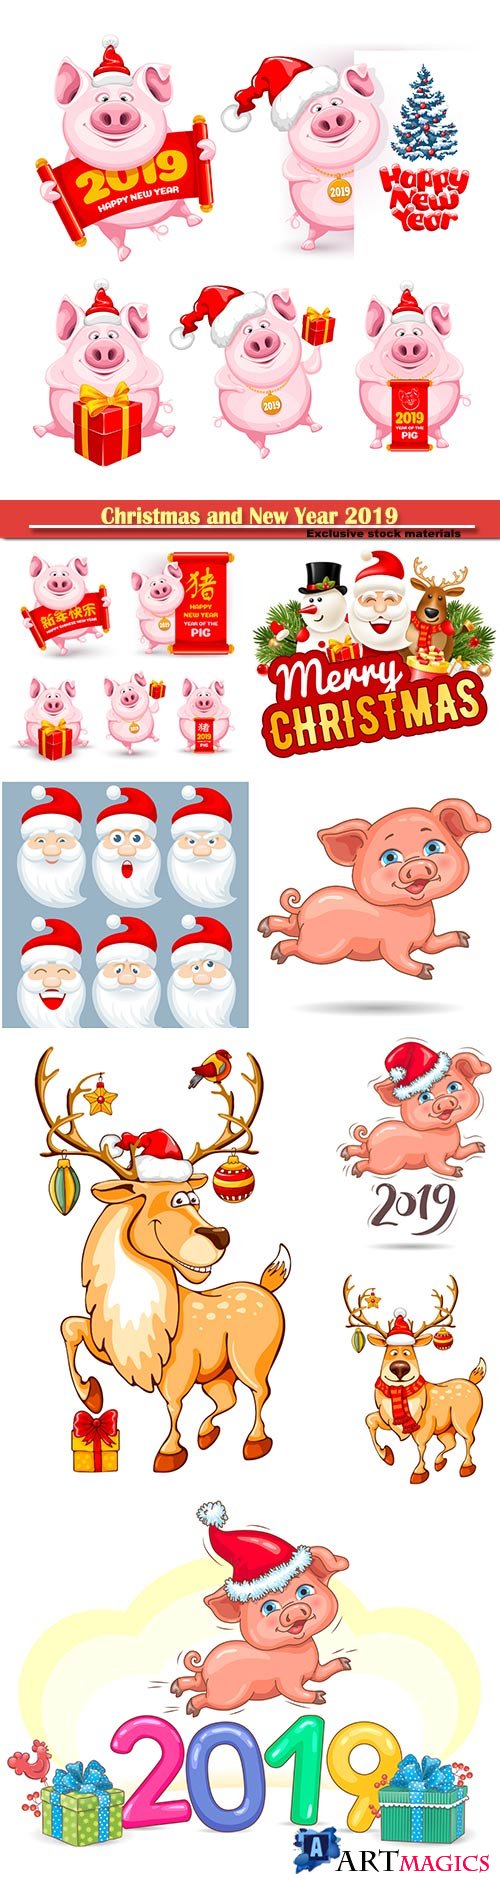 Christmas and New Year 2019 vector illustration, cartoon pigs